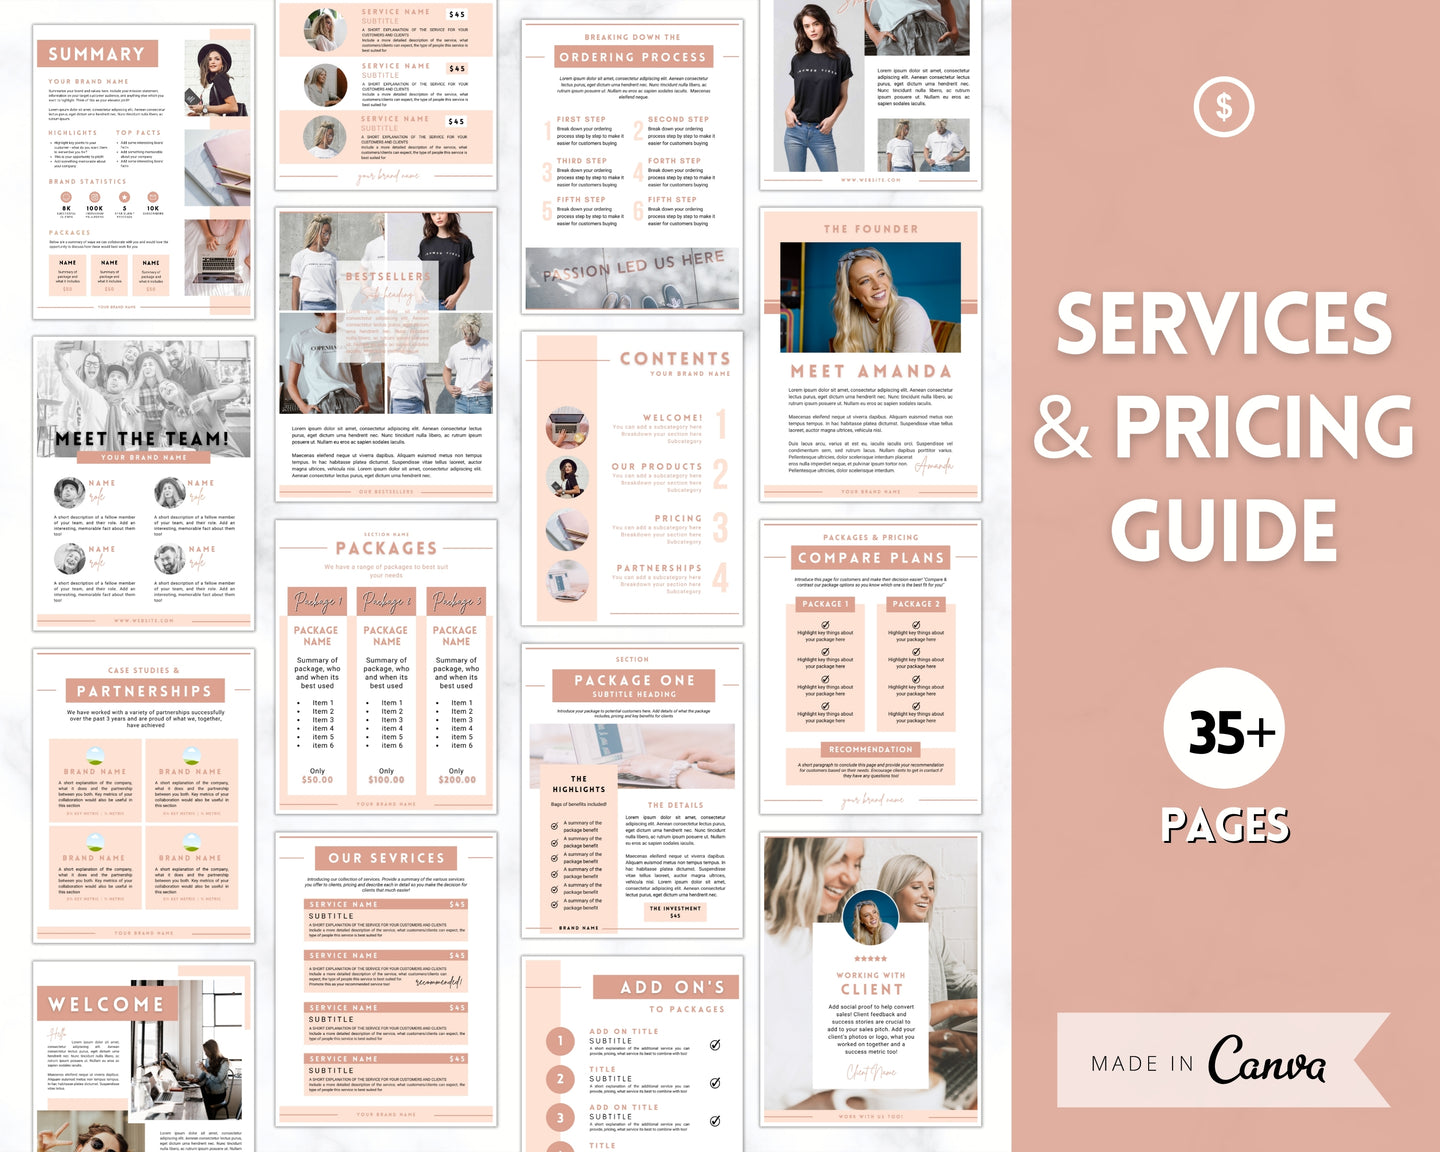 35 Editable Line Sheet Templates | Canva Wholesale Product Catalog, Pricing & Services Guide & Price List Template, Linesheet Catalogue | Brown